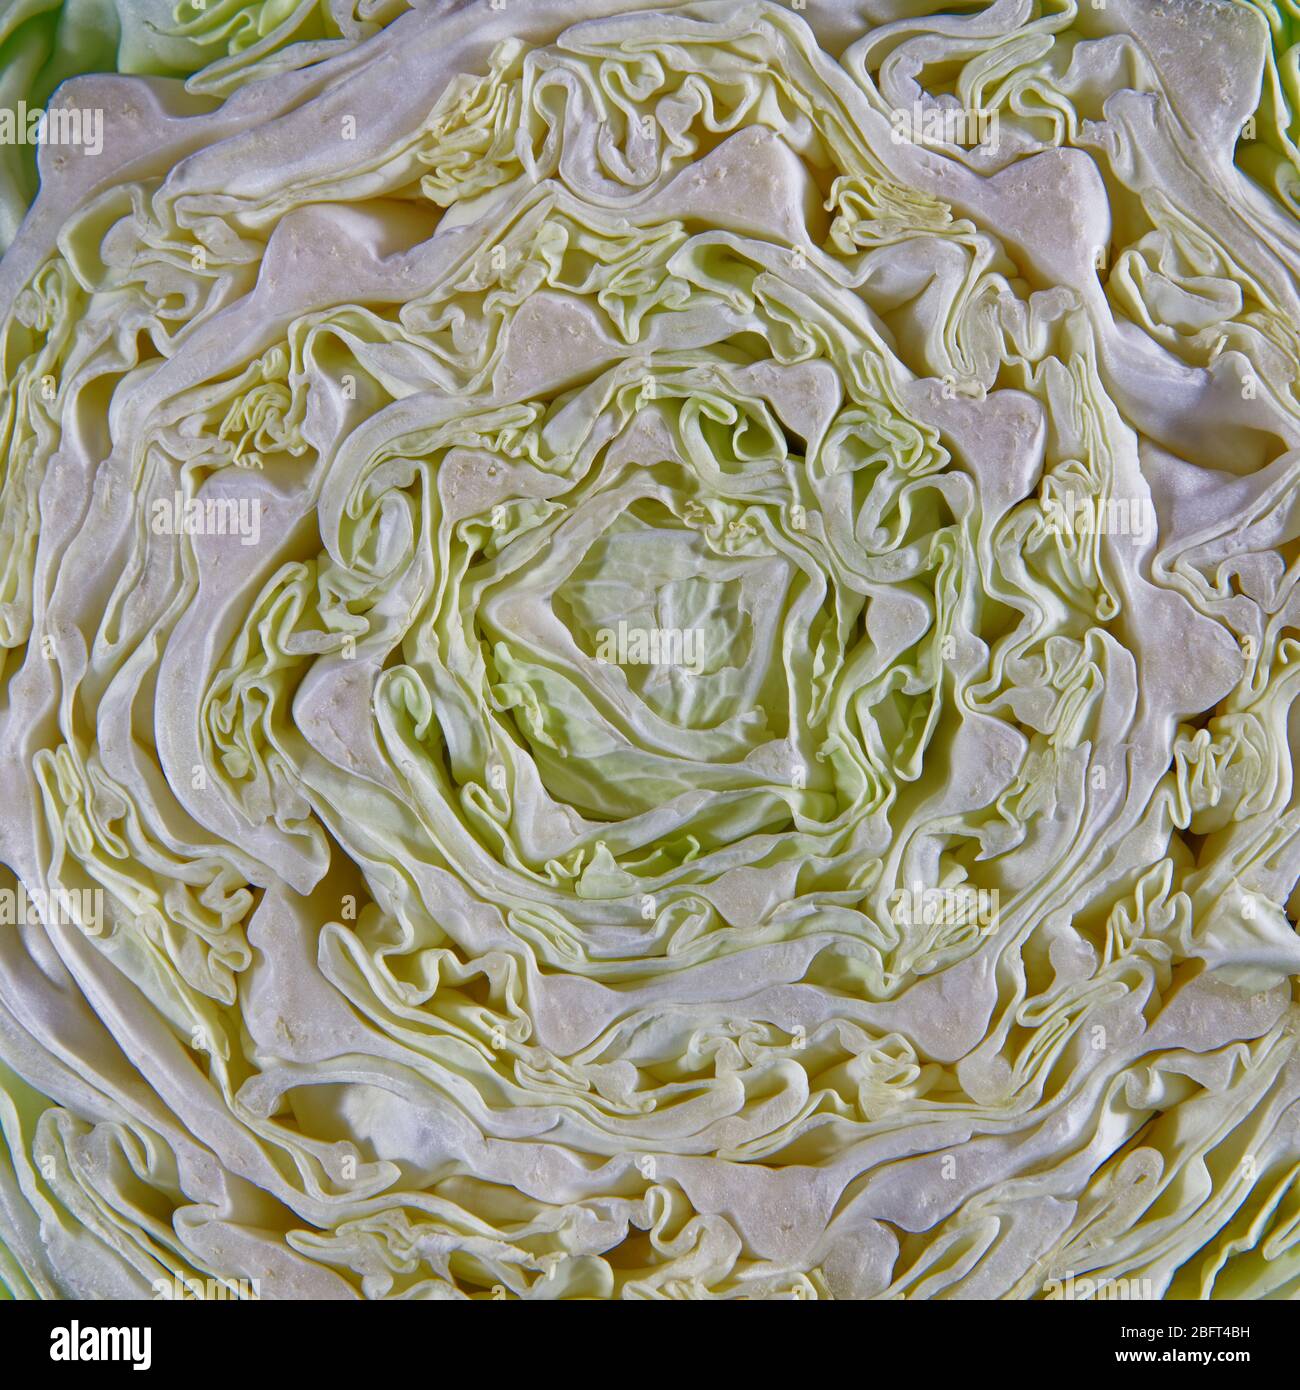 Superfood green cabbage cross section close up detail of the structure of the leaves. Stock Photo